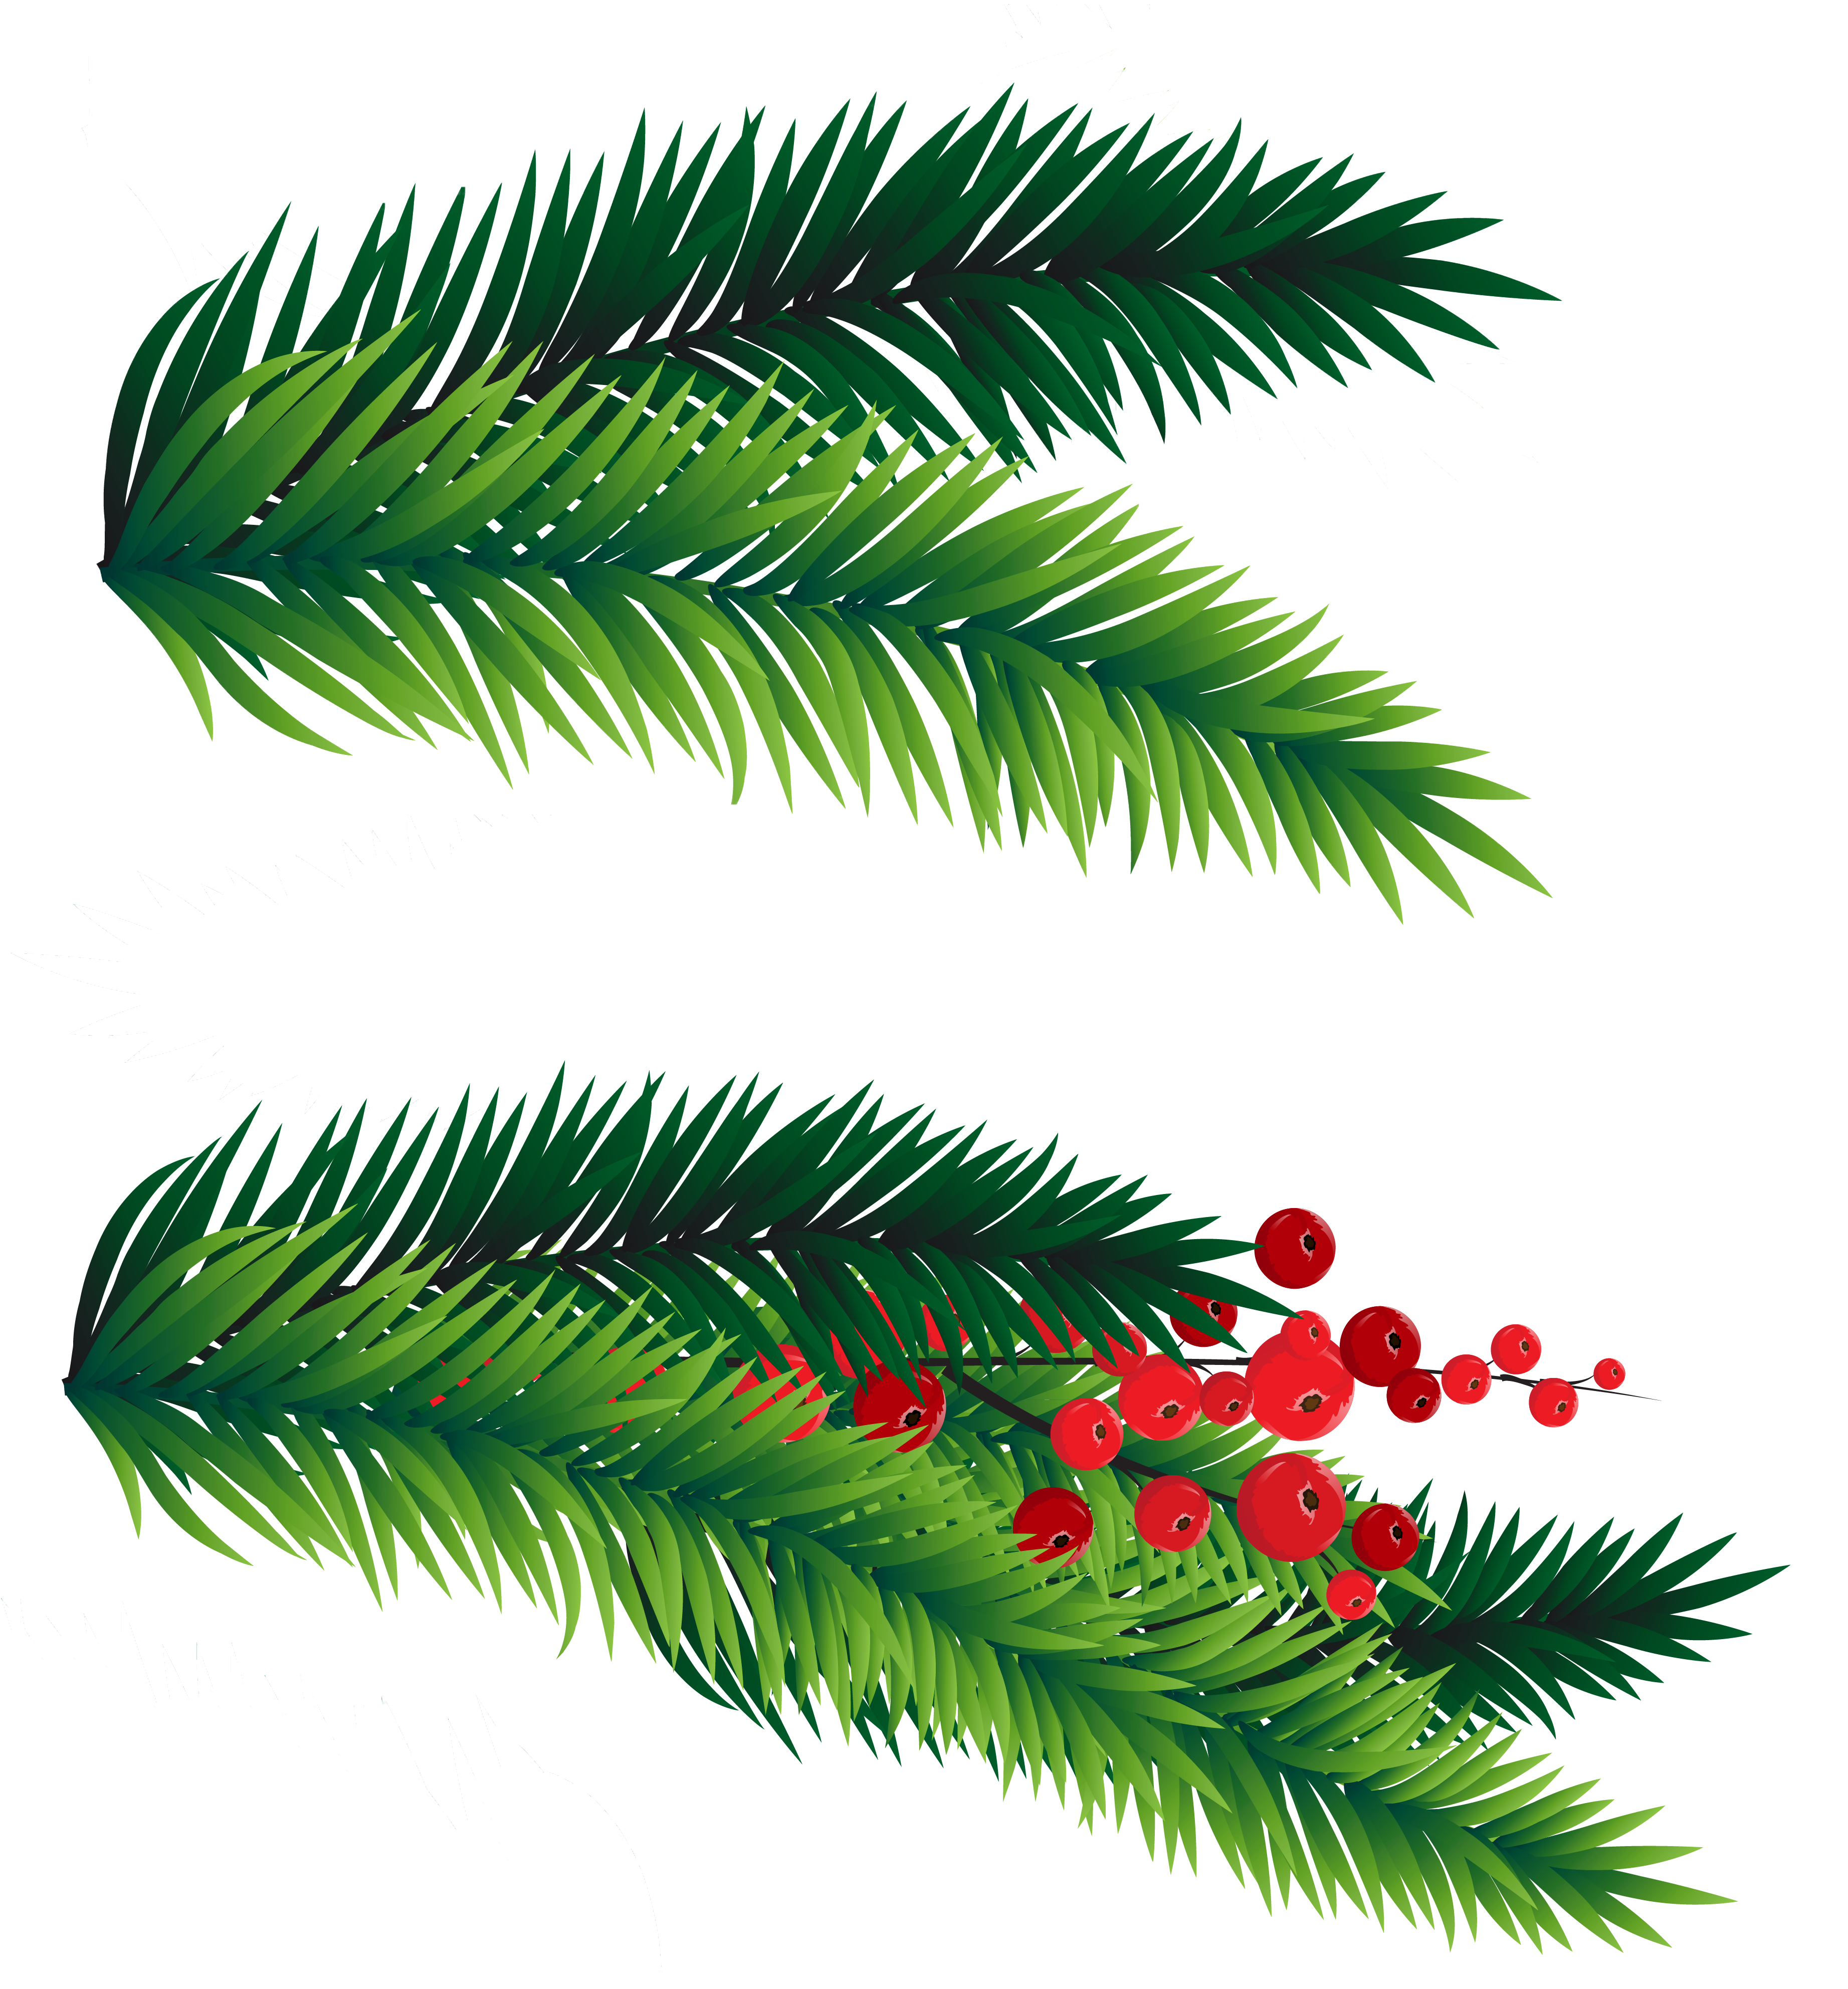 Christmas tree branches PNG